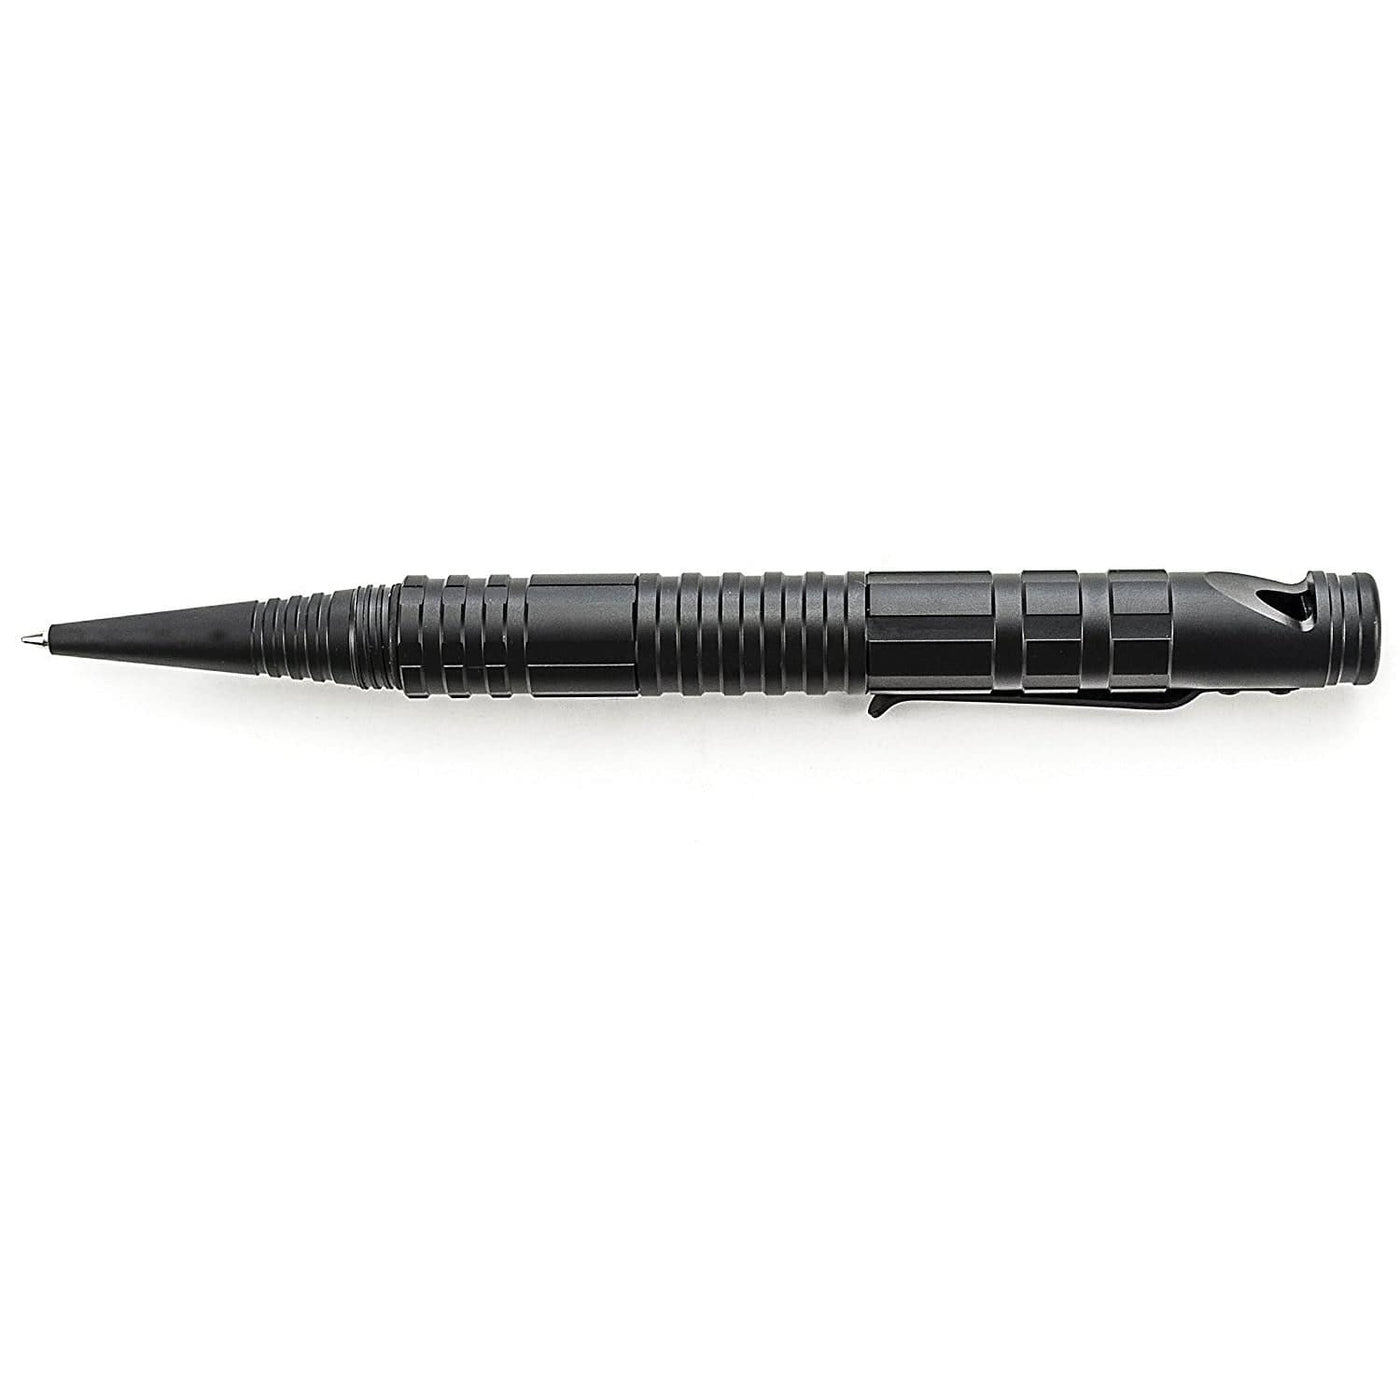 Schrade Schrade Tactical Survival Pen Black Ink Gifts And Novelty